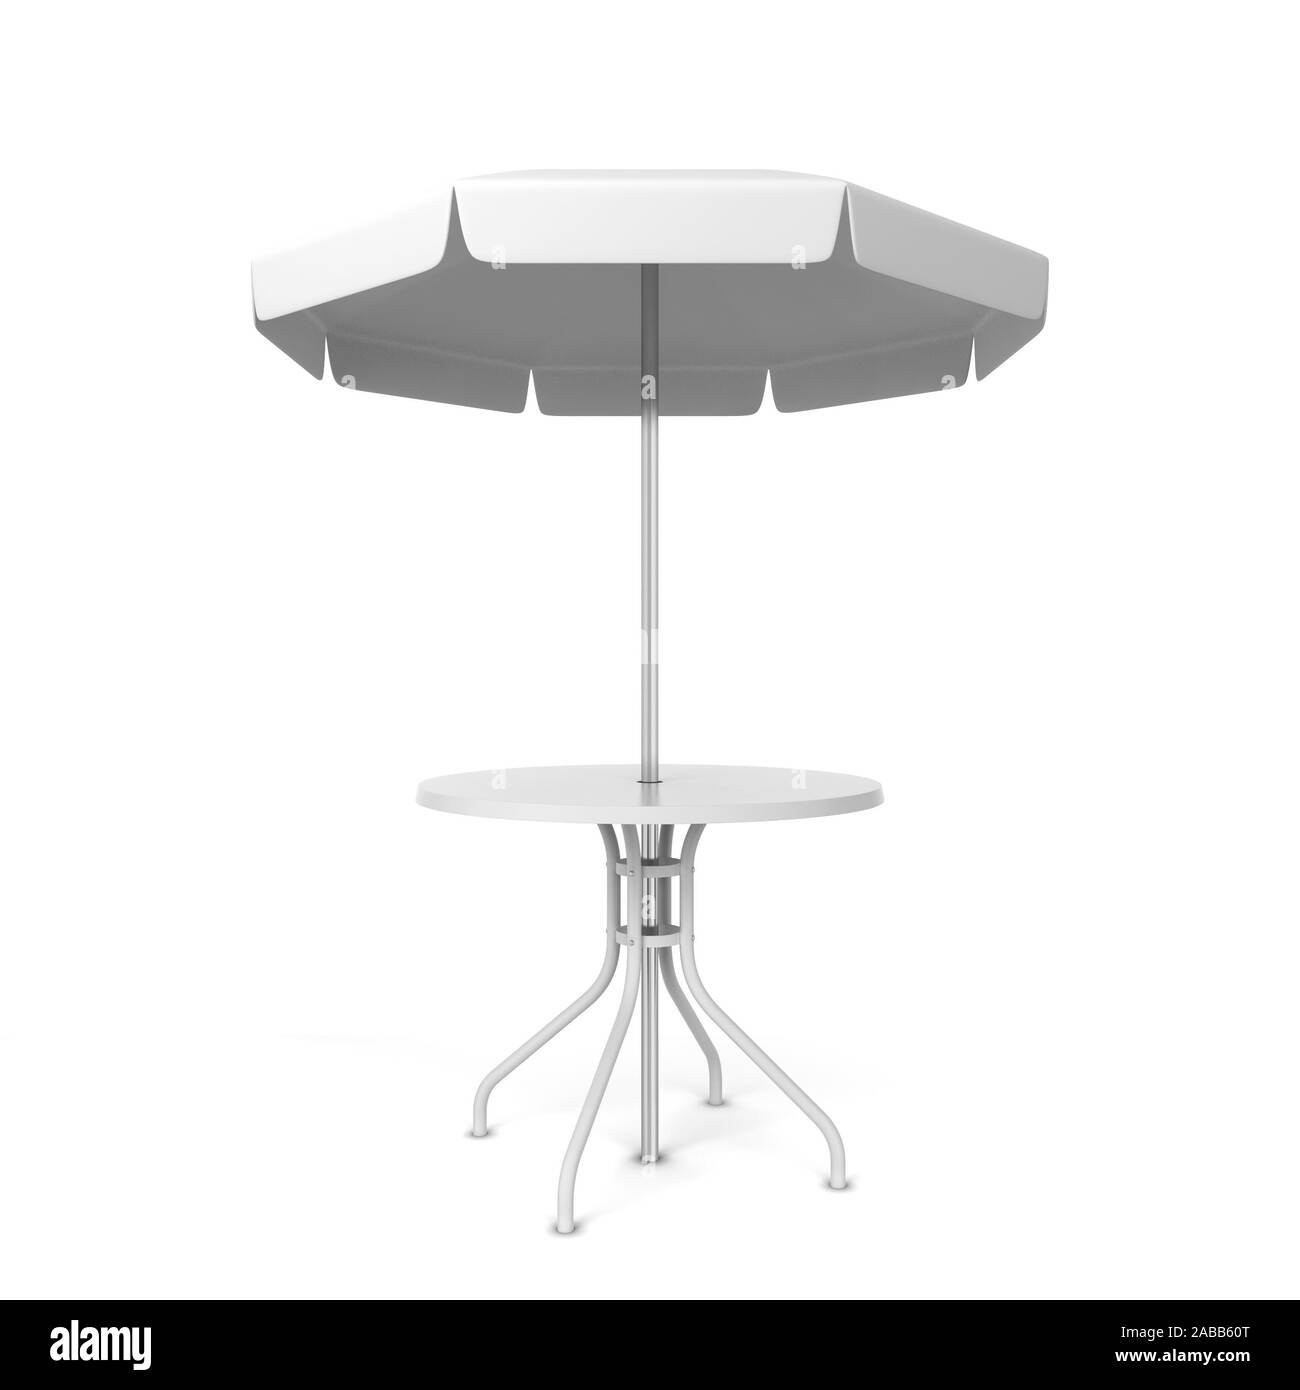 Garden umbrella with table. 3d illustration isolated on white background Stock Photo